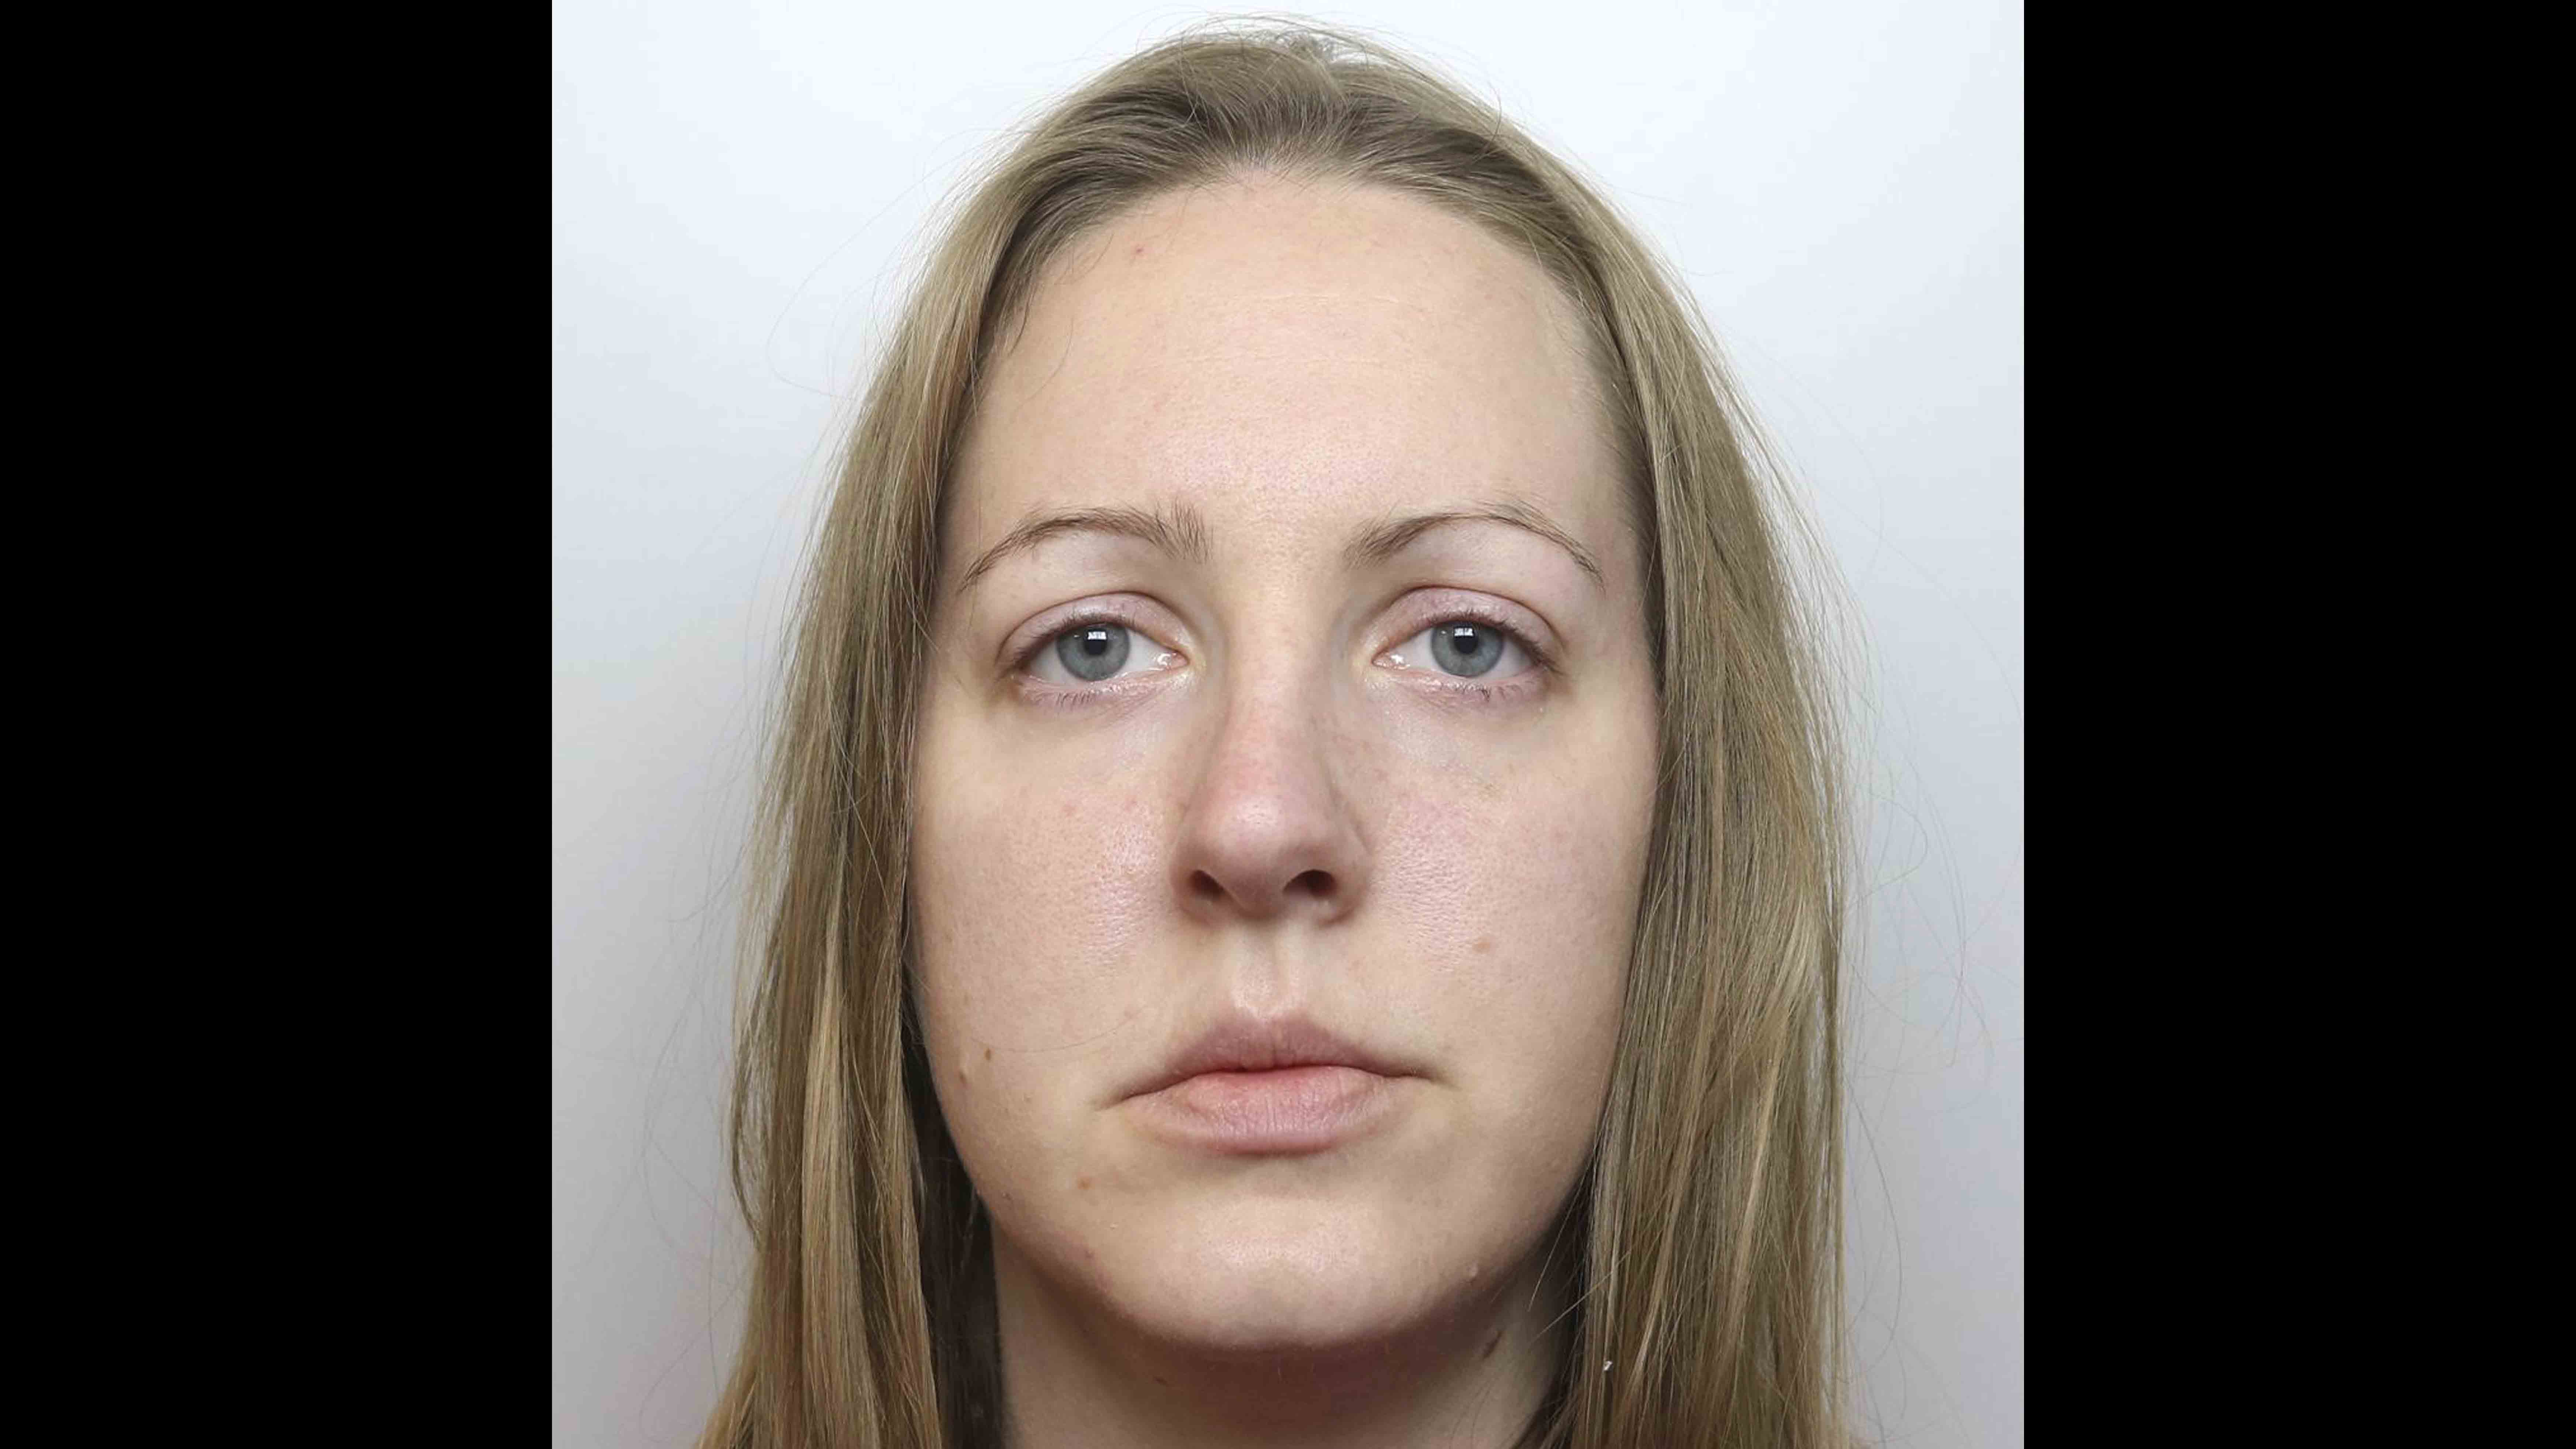 Complete betrayal of trust Neonatal nurse found guilty of killing 7 babies in a British hospital